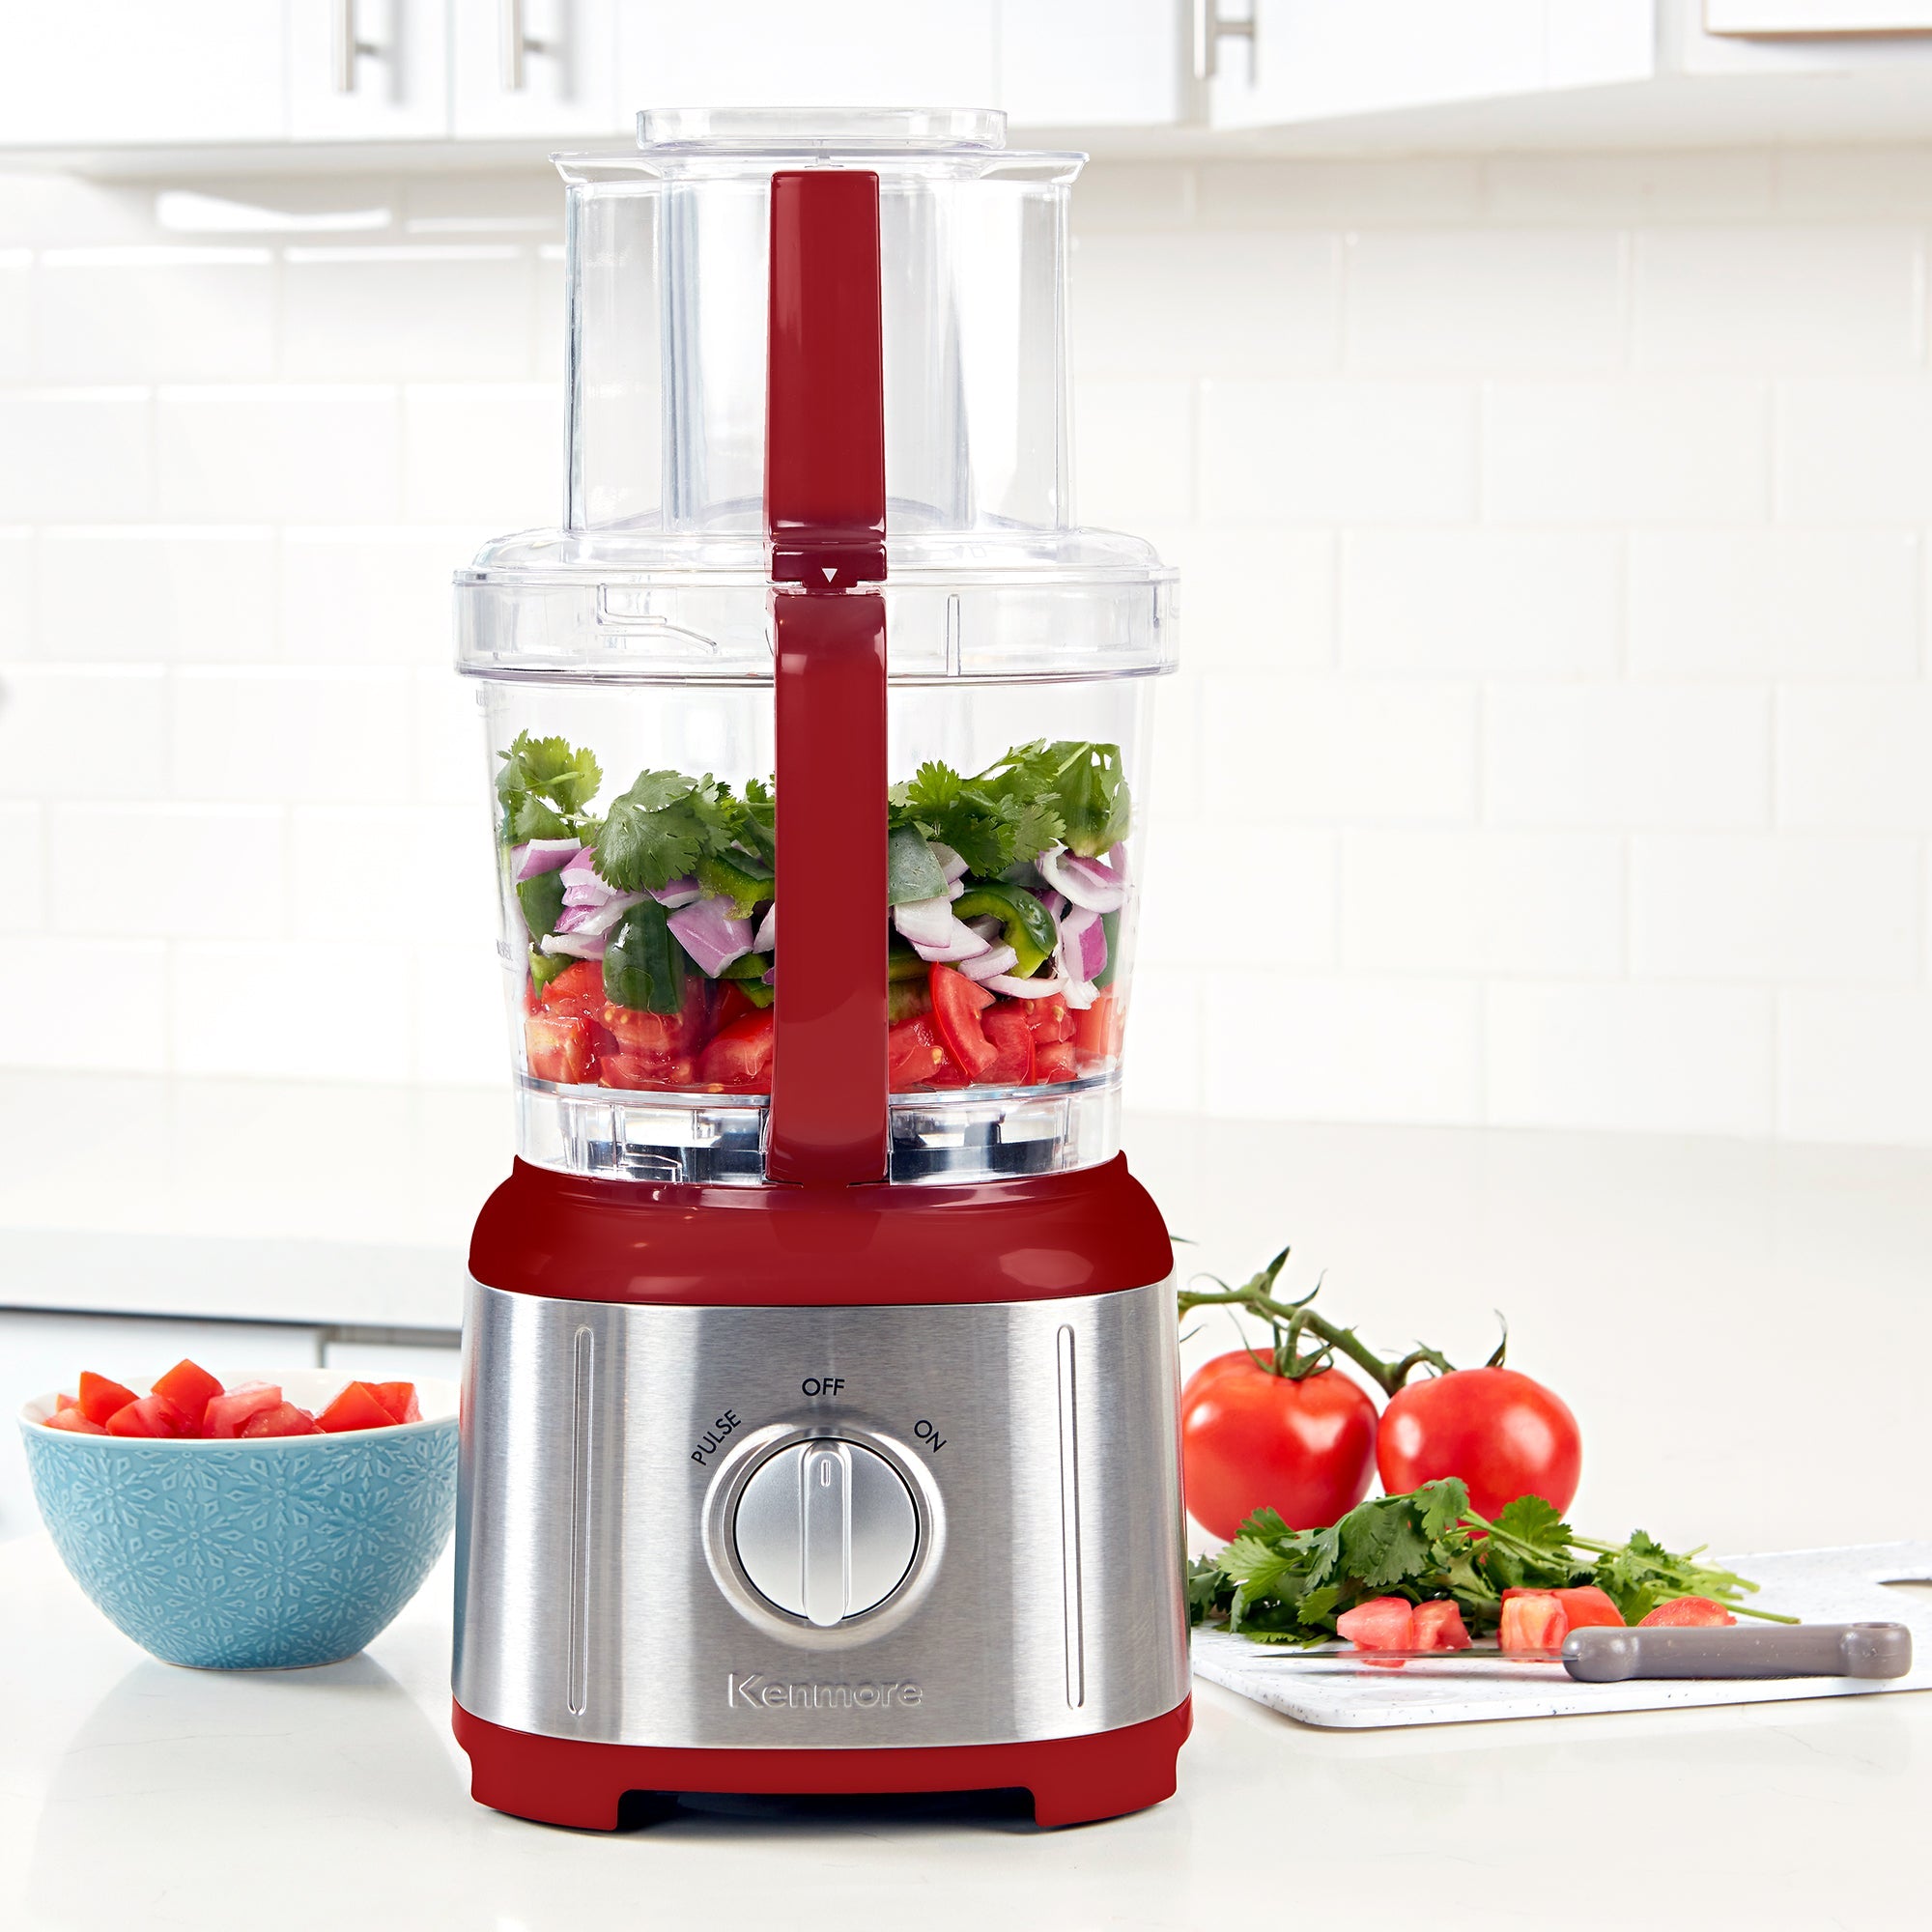 Lifestyle image of Kenmore 11 cup food processor and vegetable chopper on a light gray countertop with white tile backsplash behind. There are chopped tomatoes, red onions, and cilantro in the food processor, a bowl of chopped tomatoes to the left and a cutting board, knife, and whole and chopped ingredients to the right